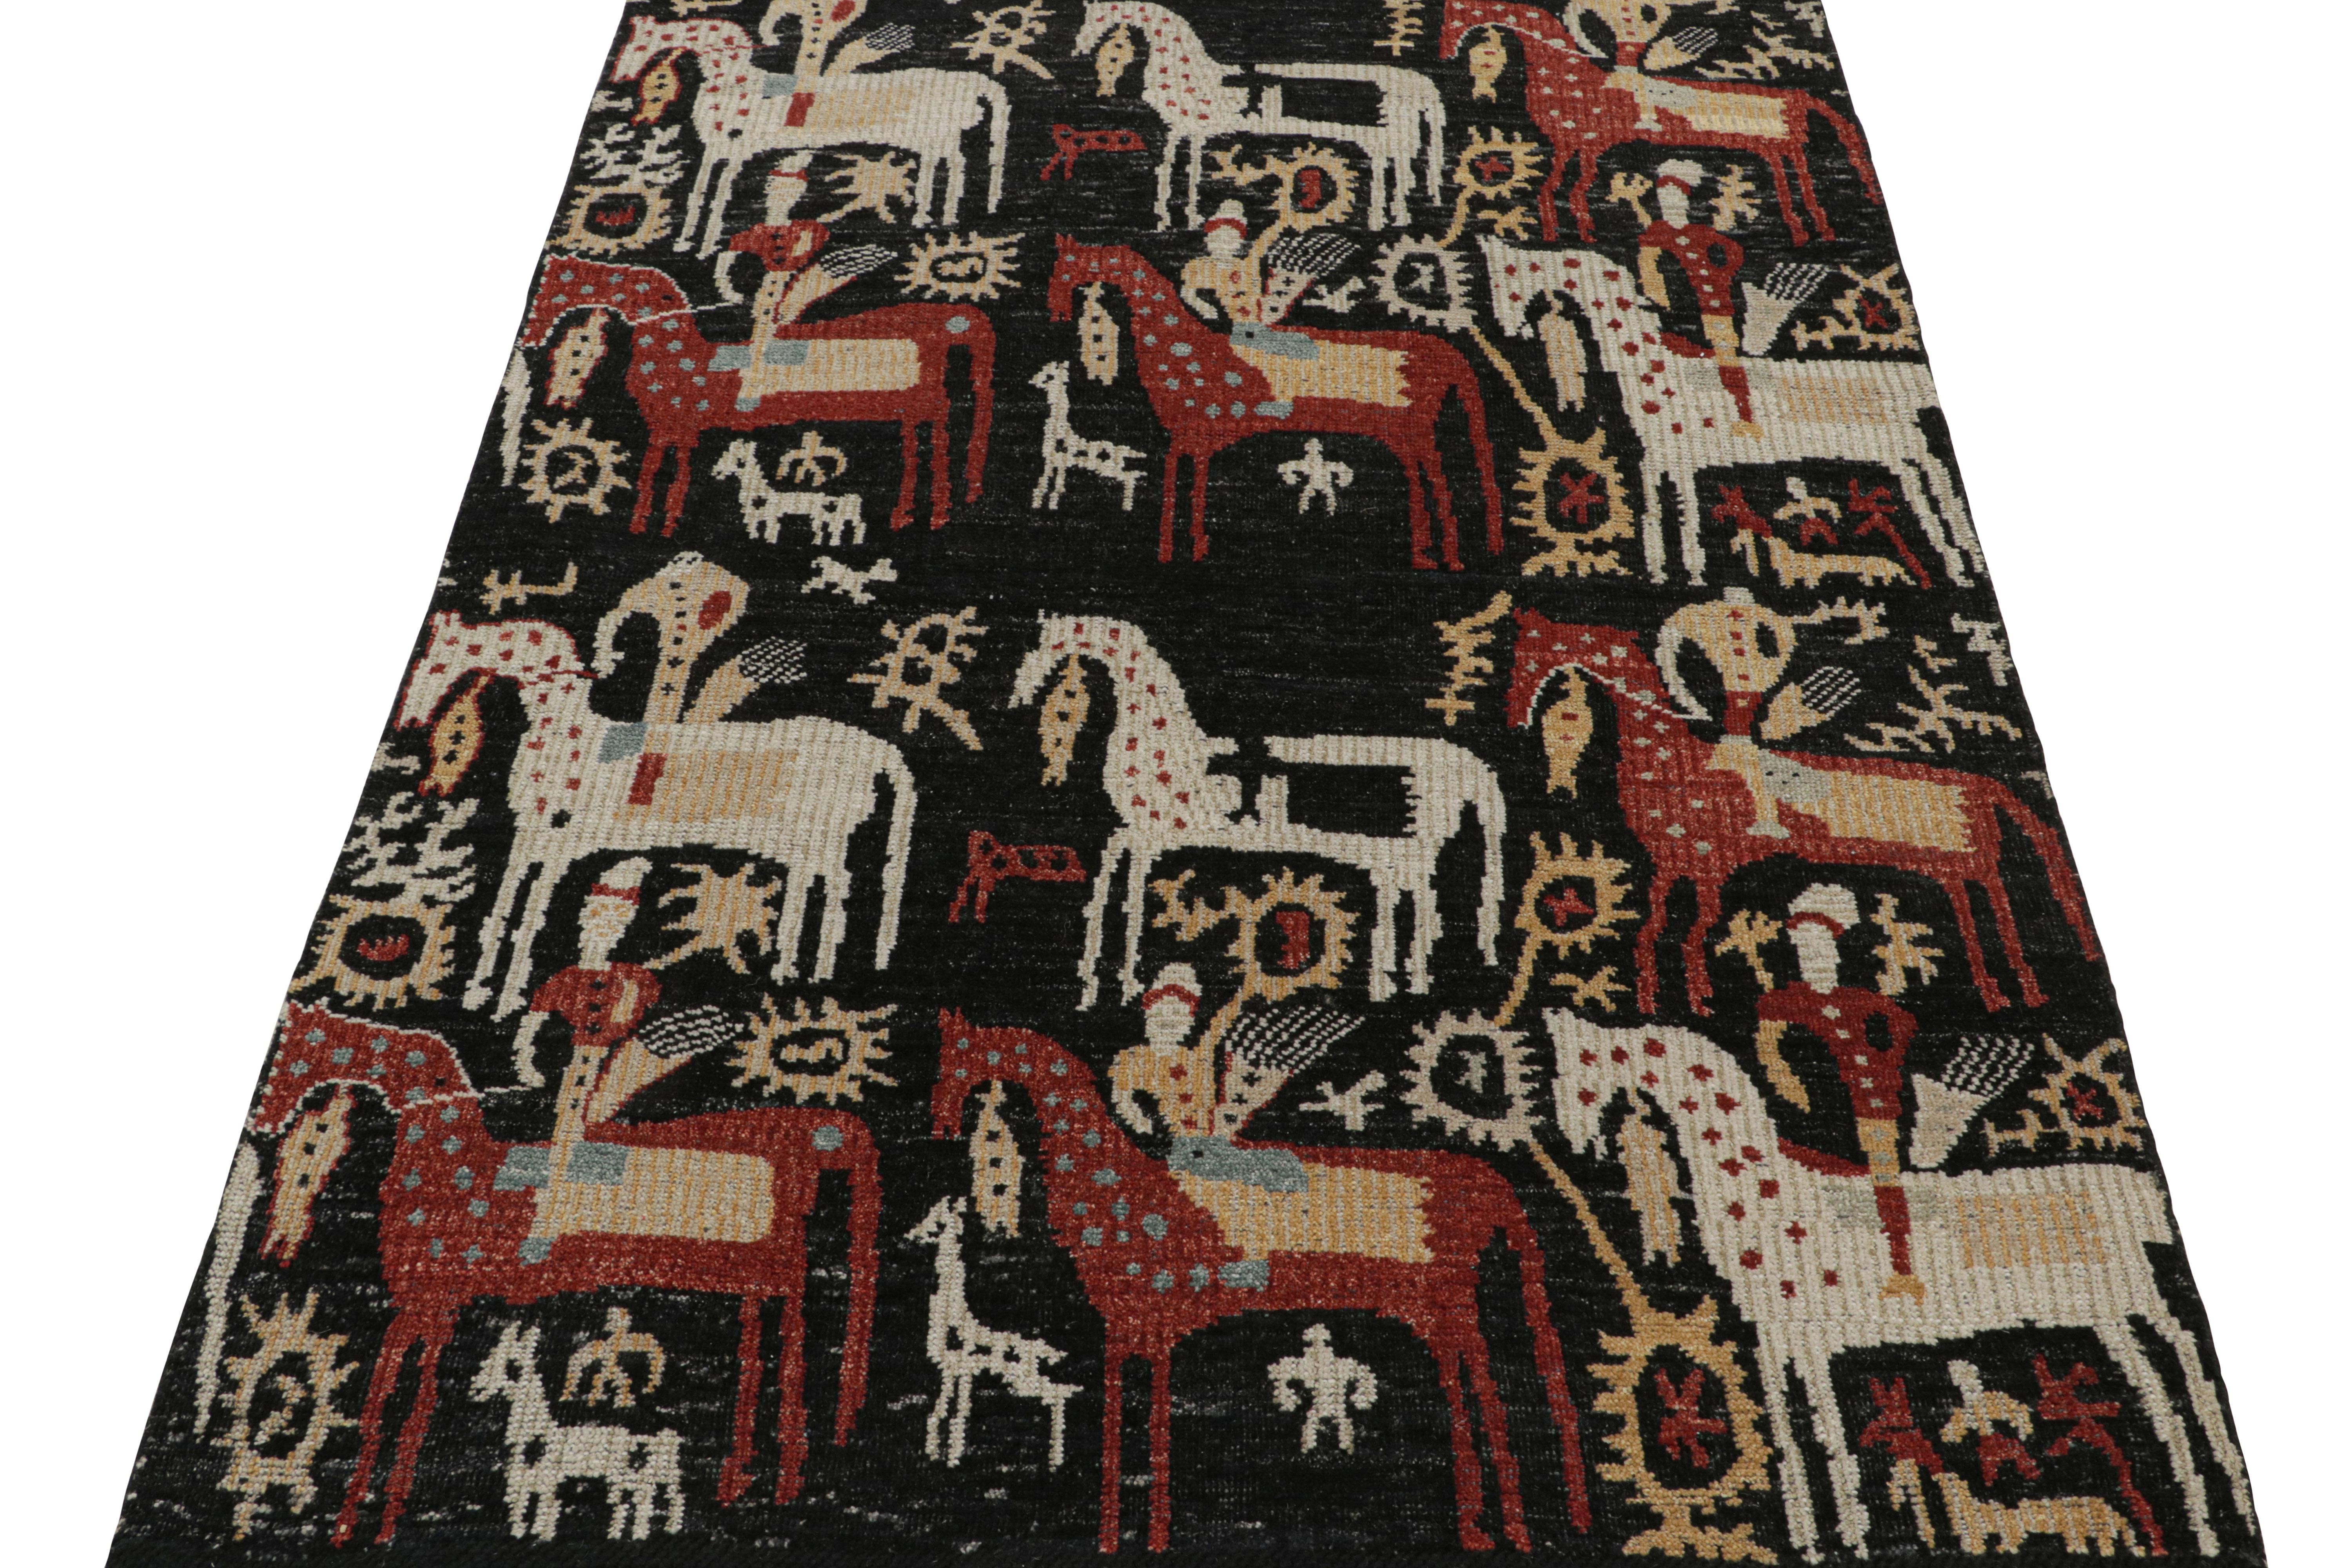 Modern Rug & Kilim’s Caucasian-Style Rug in Black with Horseback Rider Pictorials For Sale